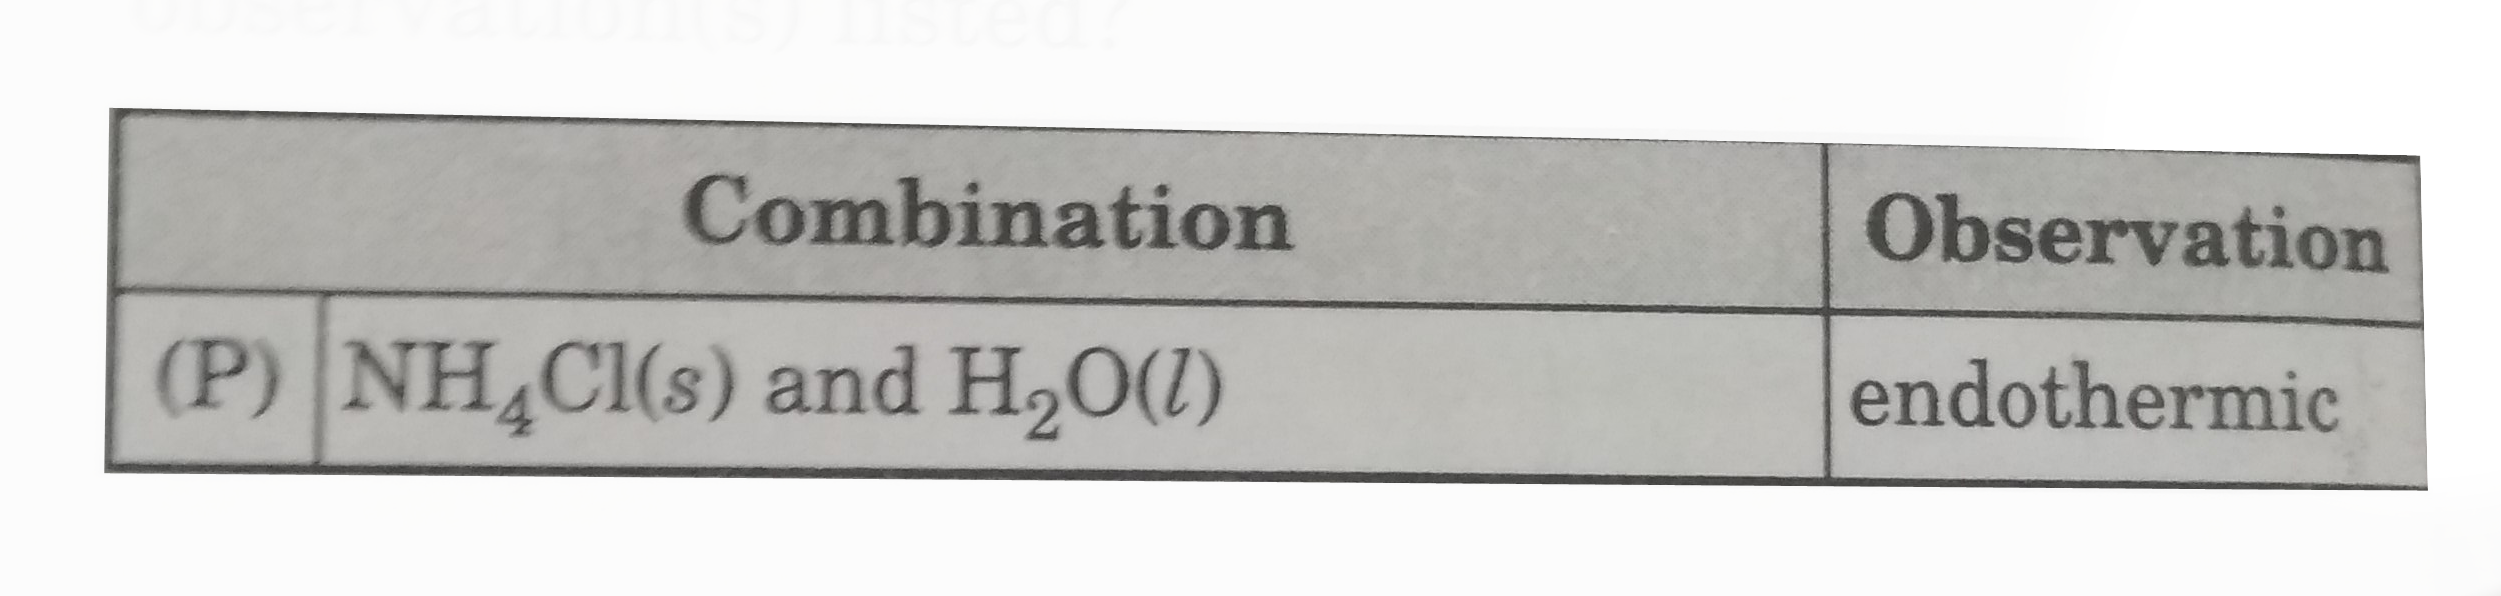 Which sets of chemicals , when mixed , produce the observation (s) listed ?